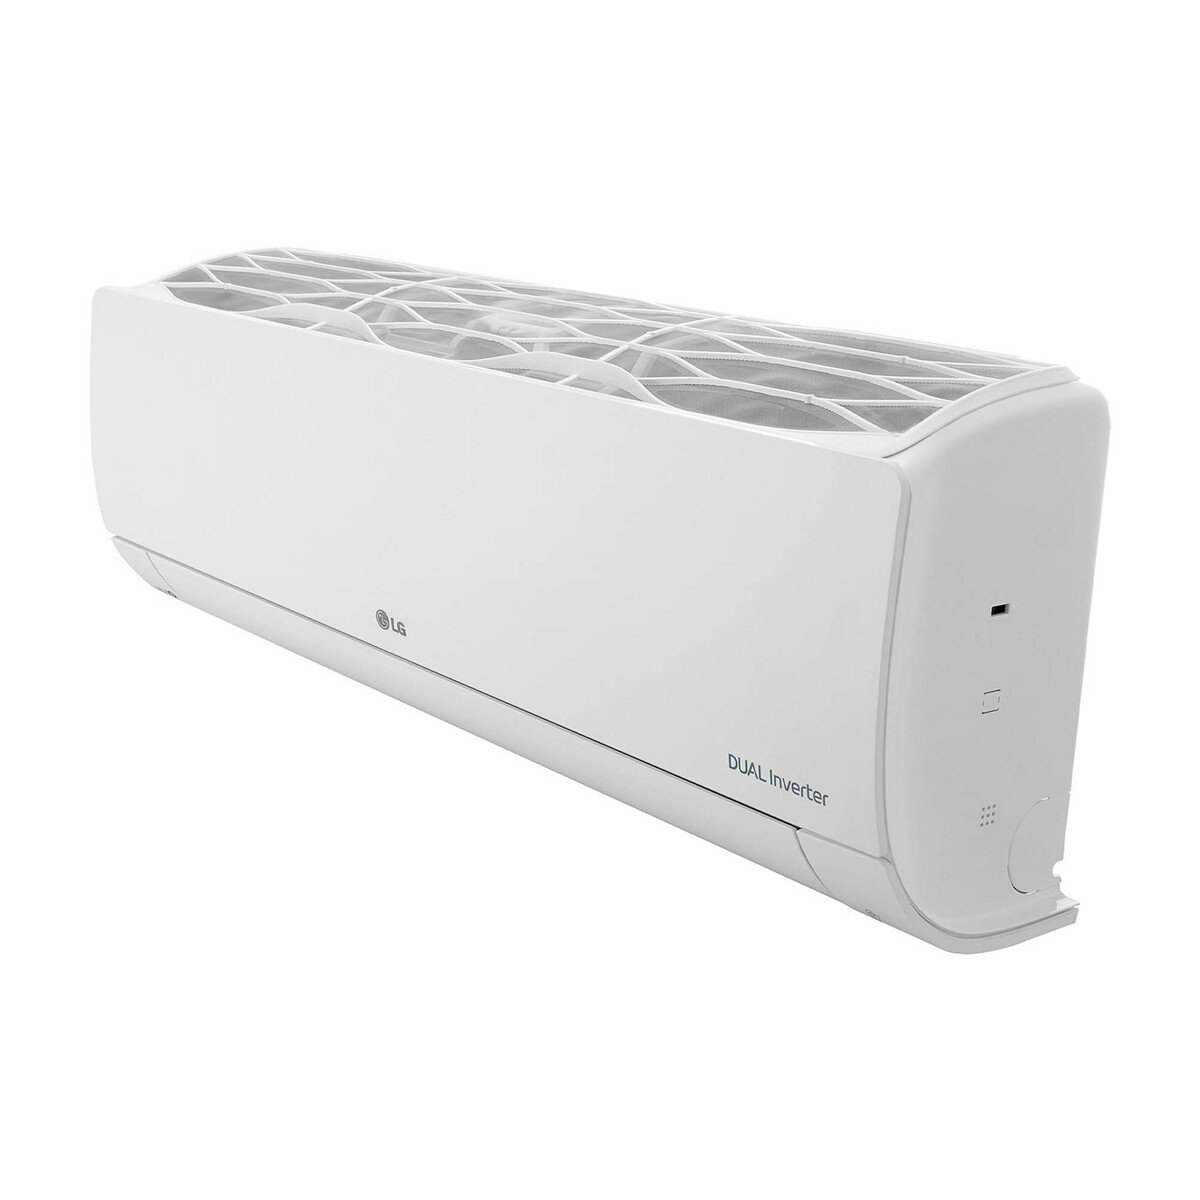 LG Split Air Conditioner I27TNB 2 Ton, Faster Cooling, TÜV, Low Decibel, Auto Cleaning